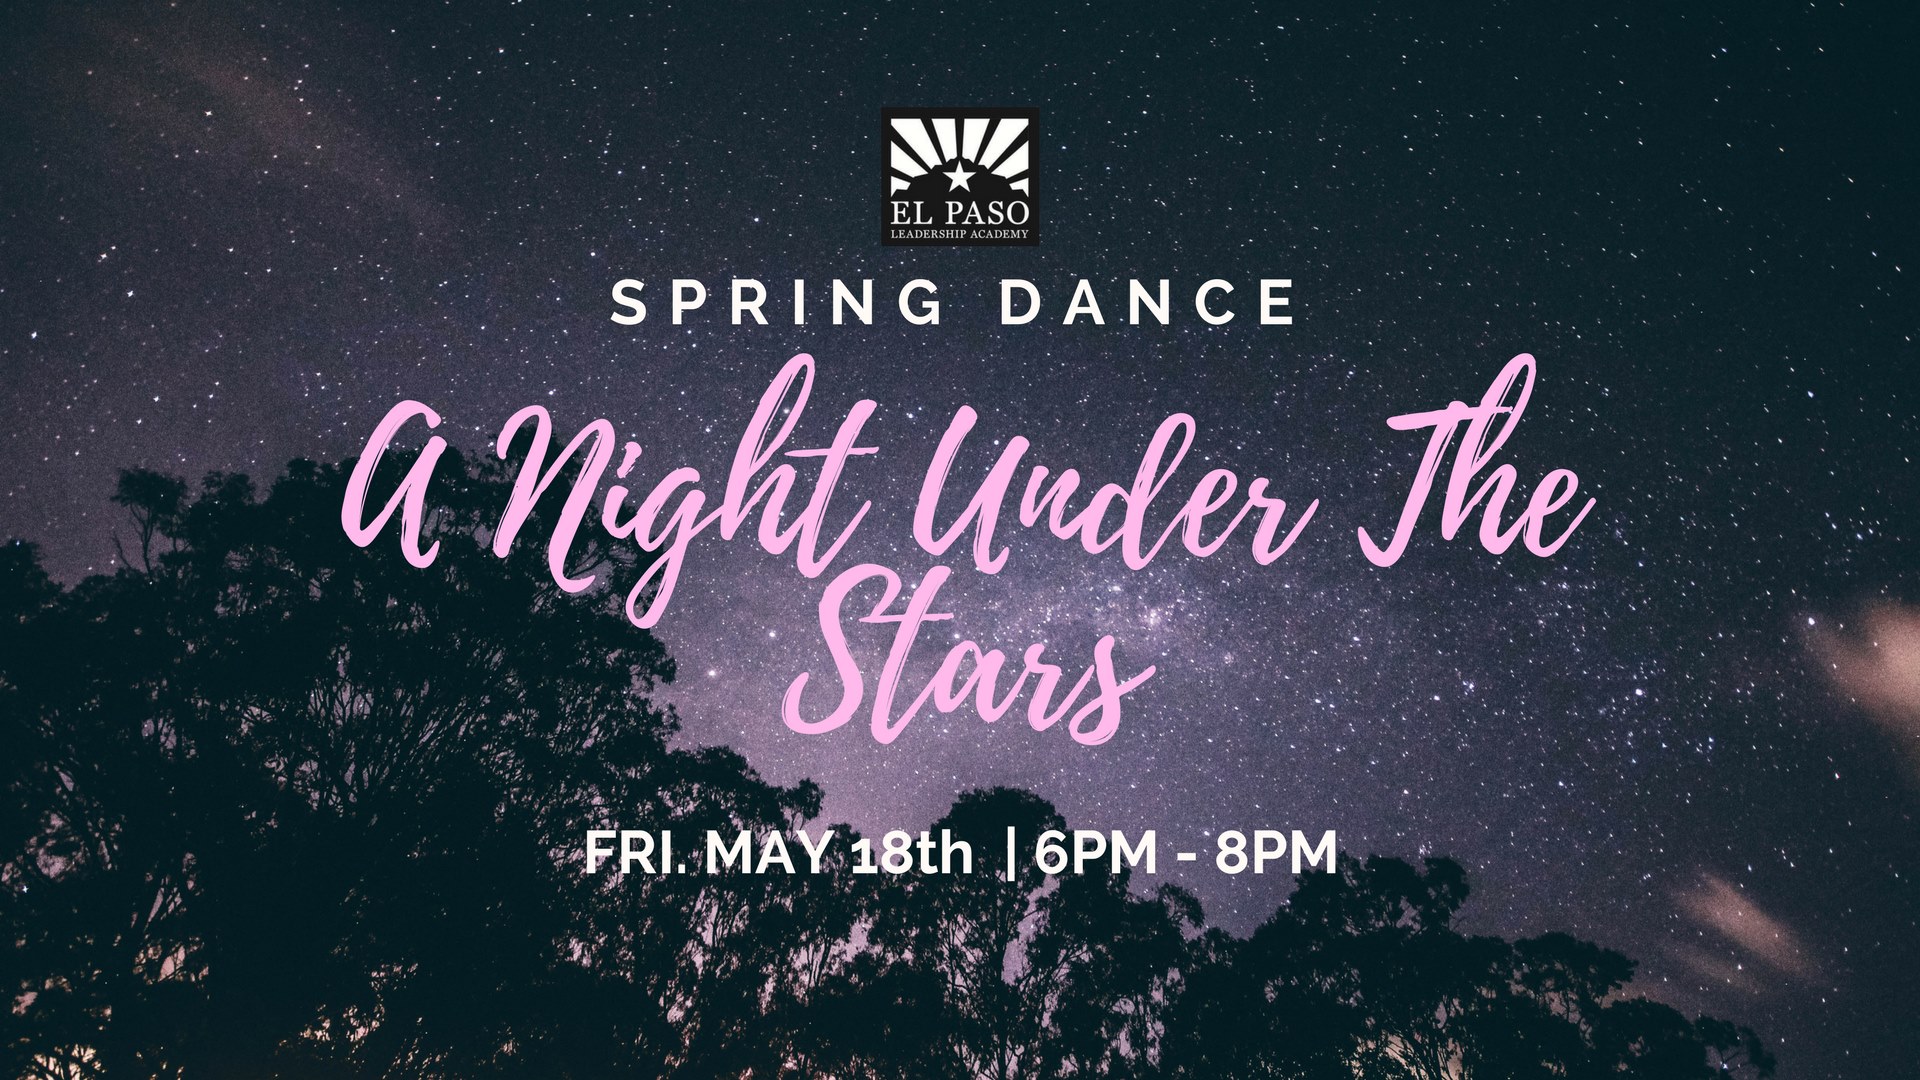 Spring Dance - A Night Under The Stars